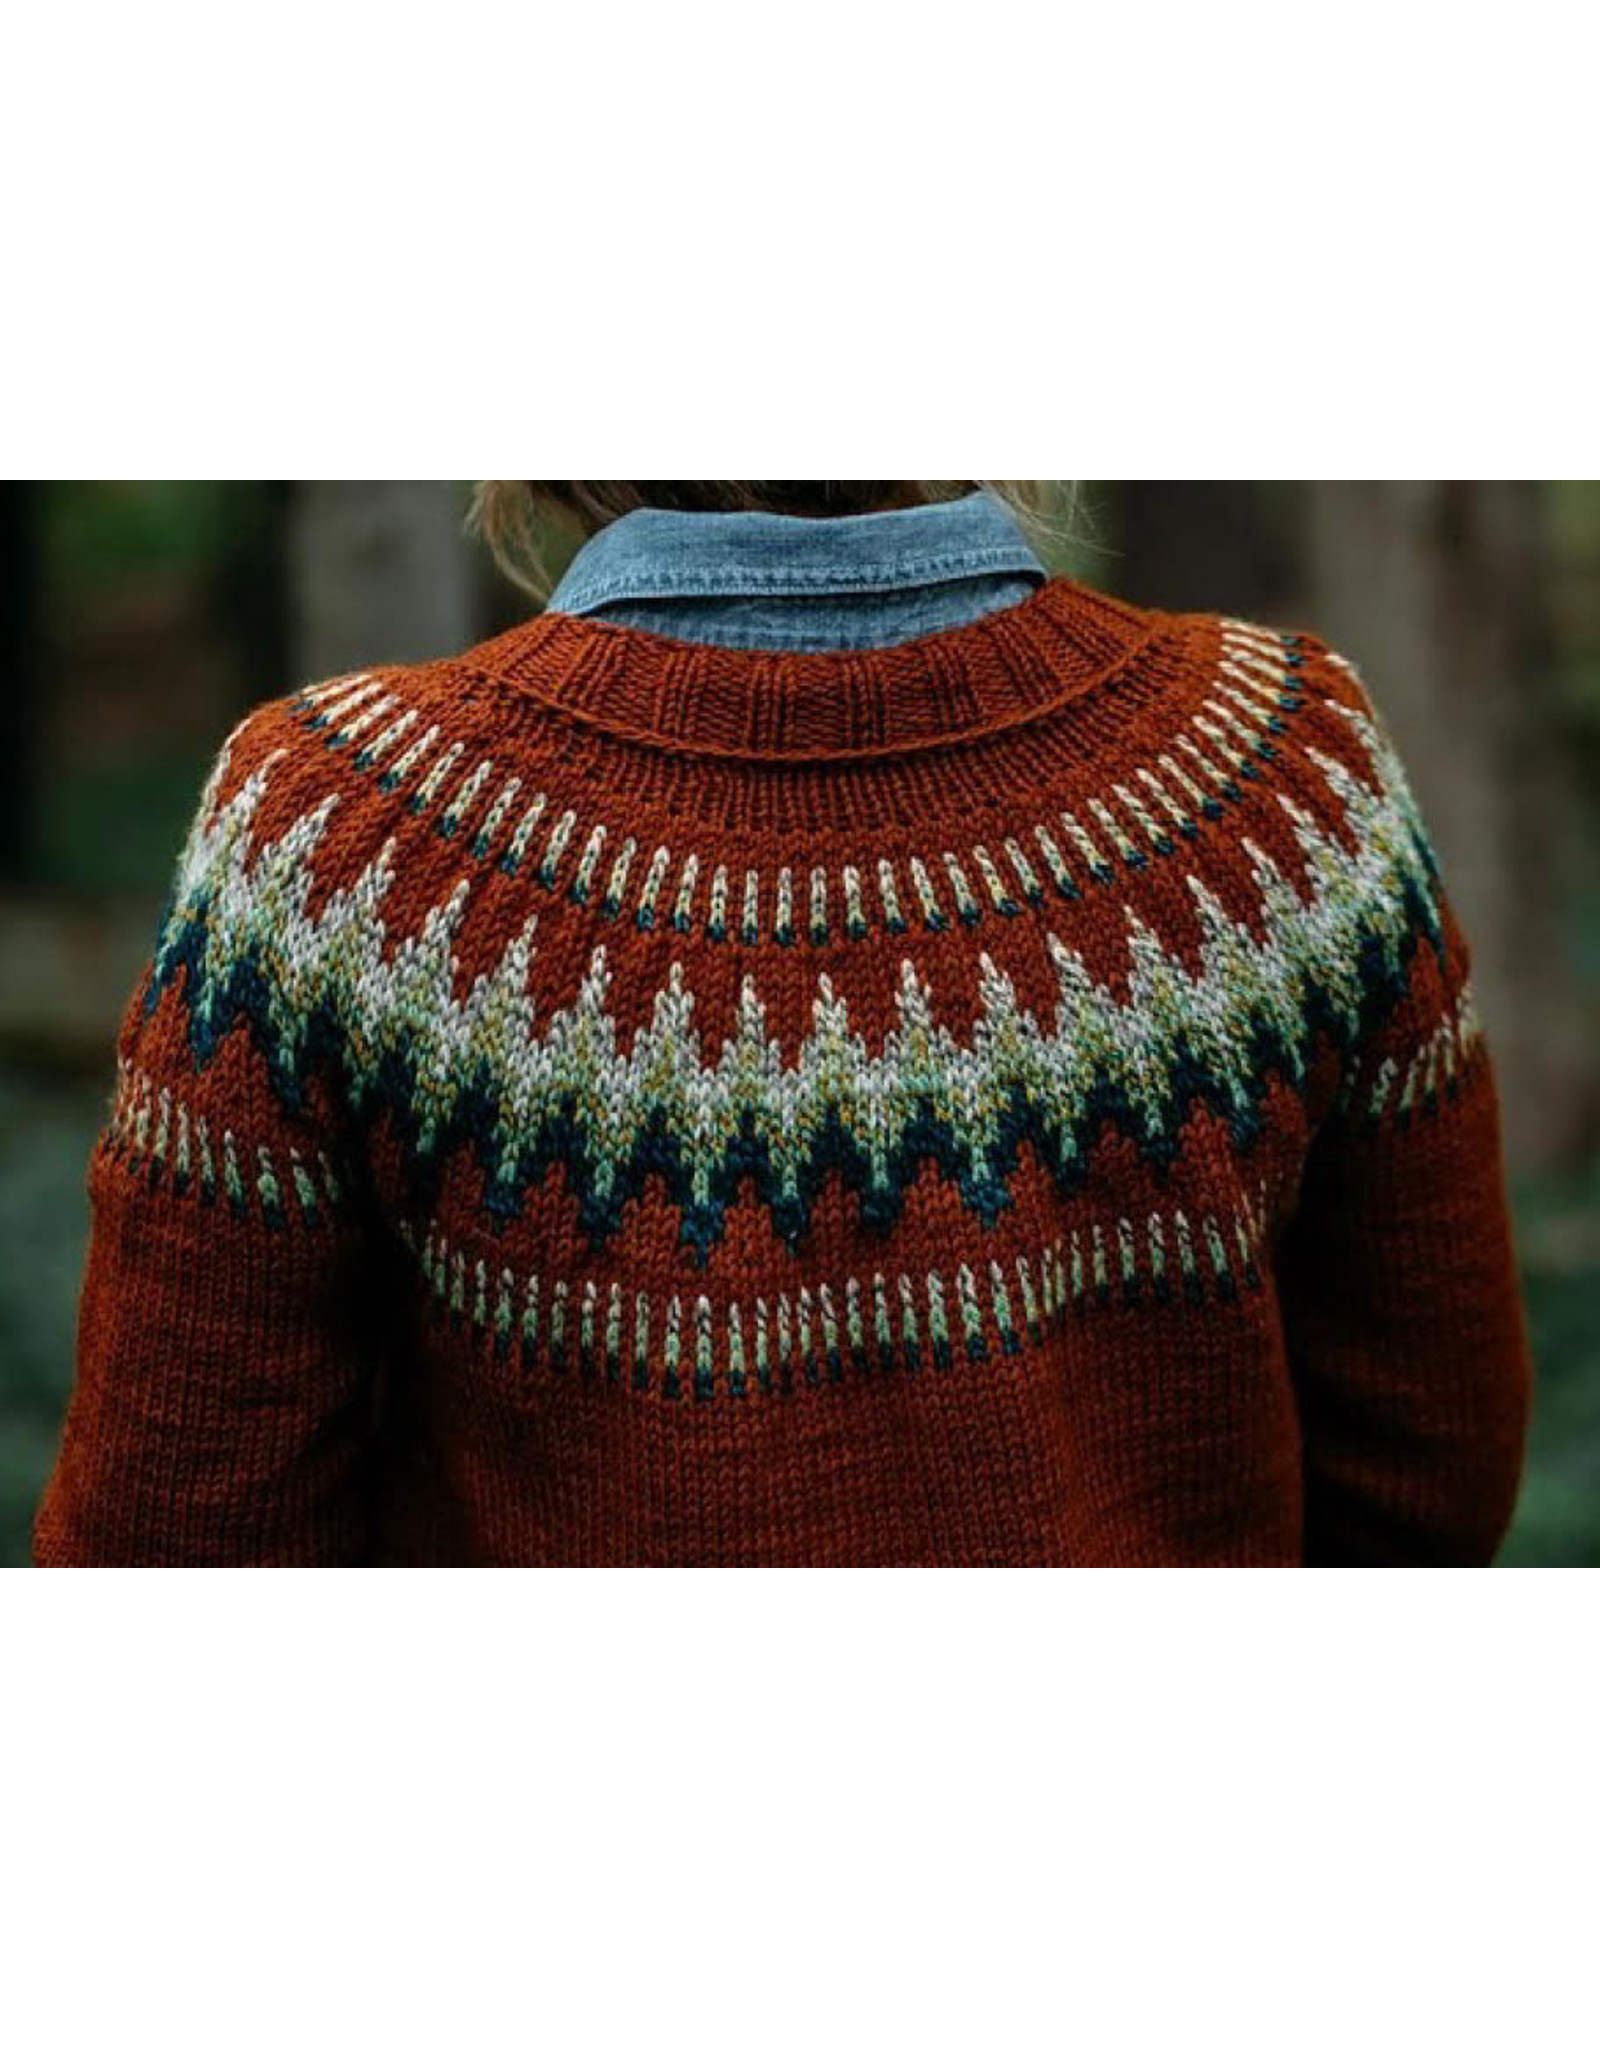 Stranded by the Sea Class: Fundamentals of Fair Isle